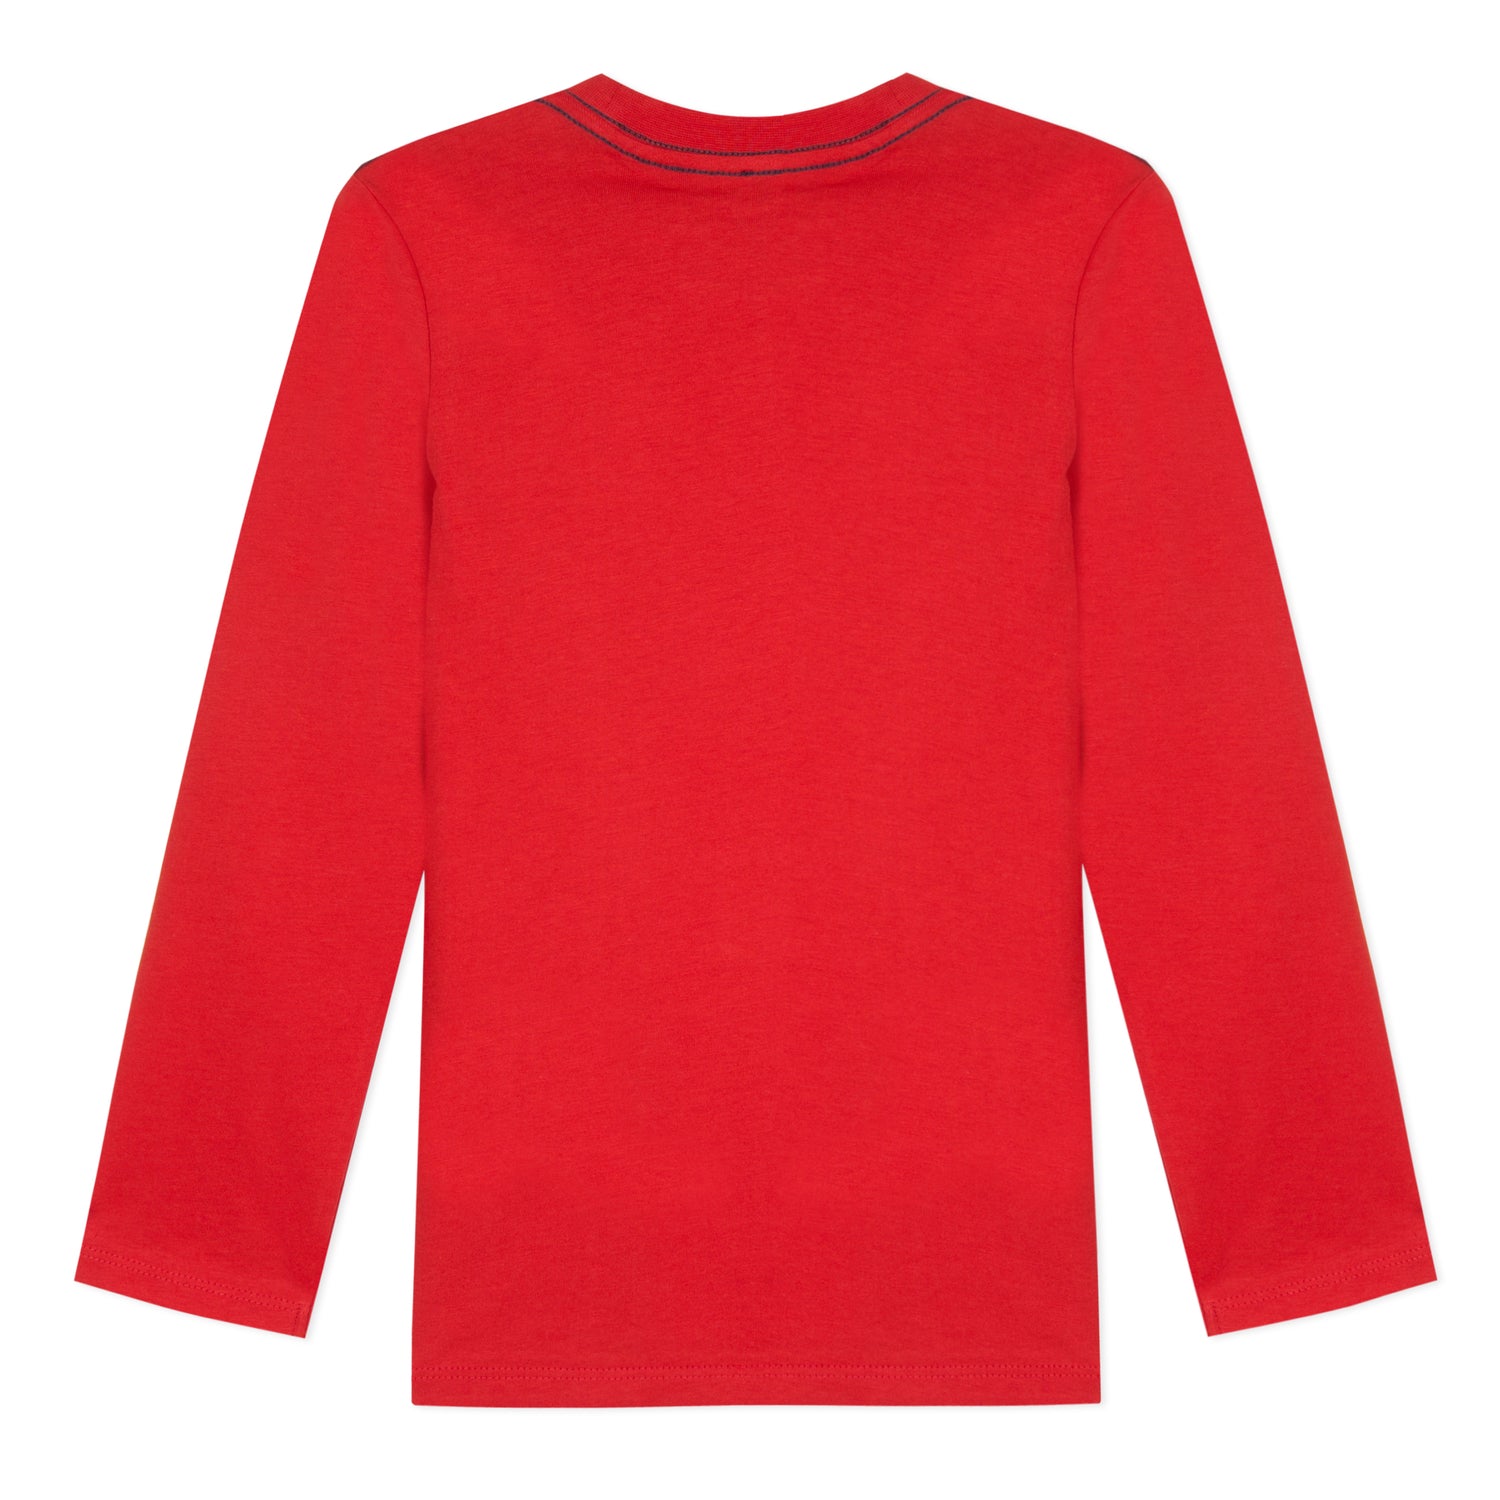 Boys Red Cotton Top